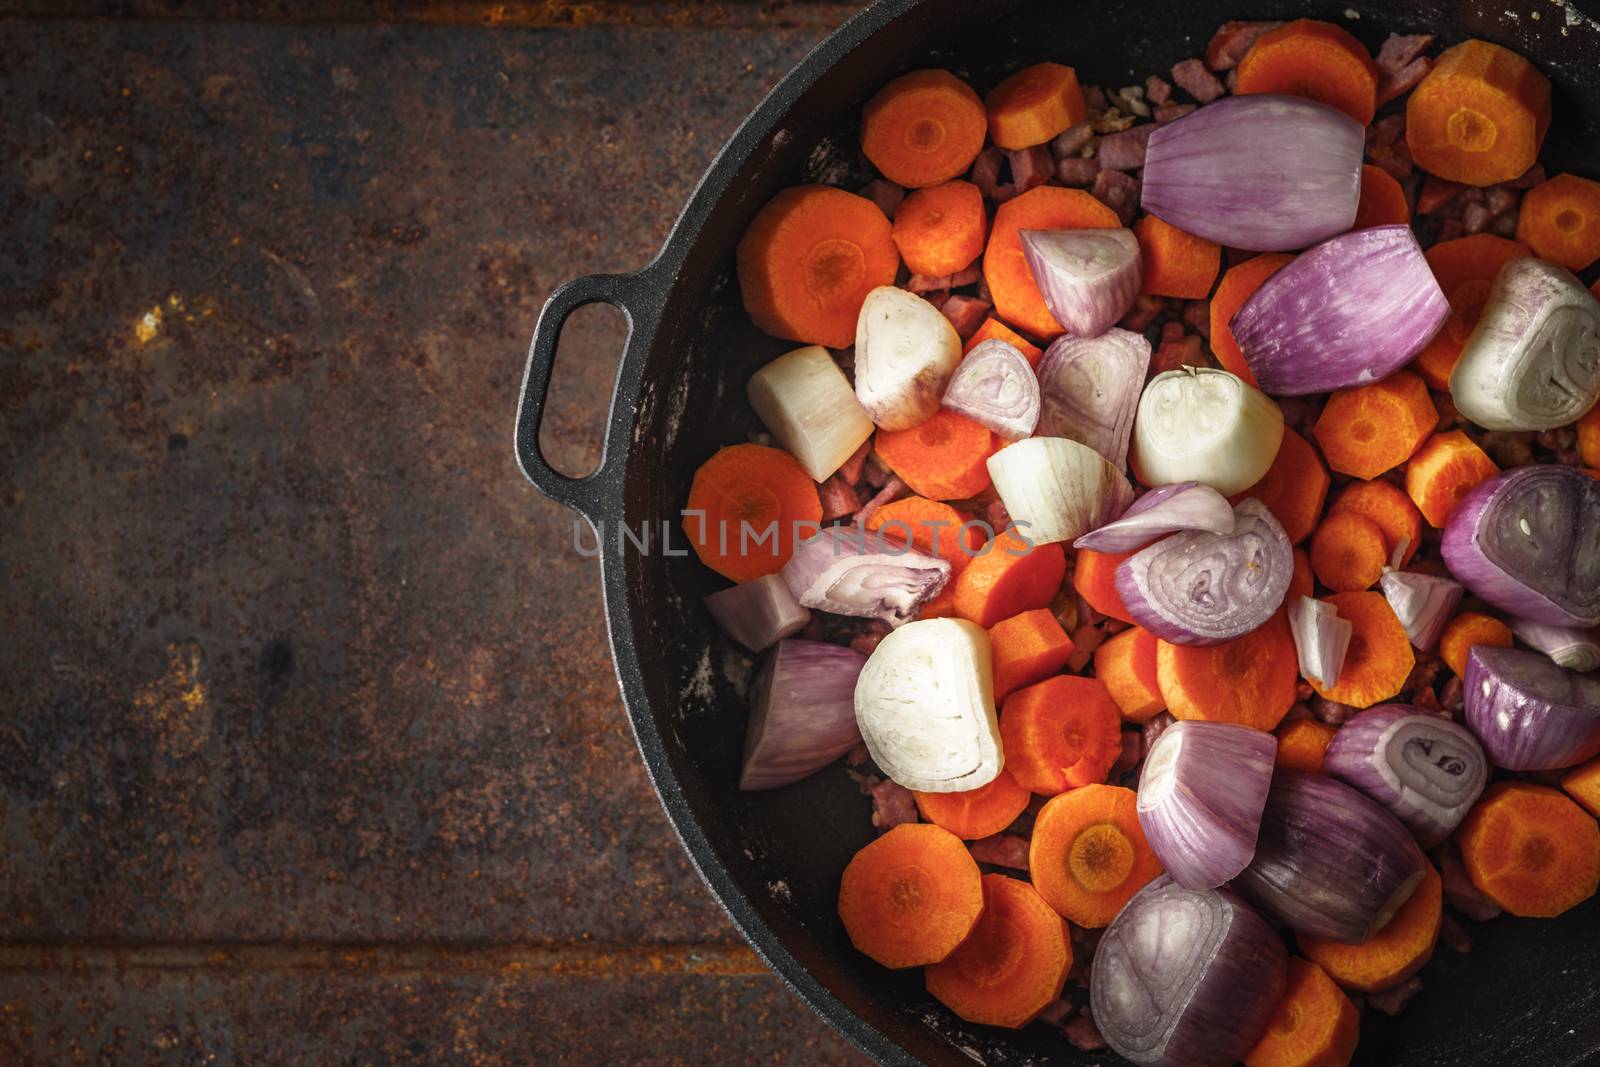 Shallot and carrots in the pan on the metal background